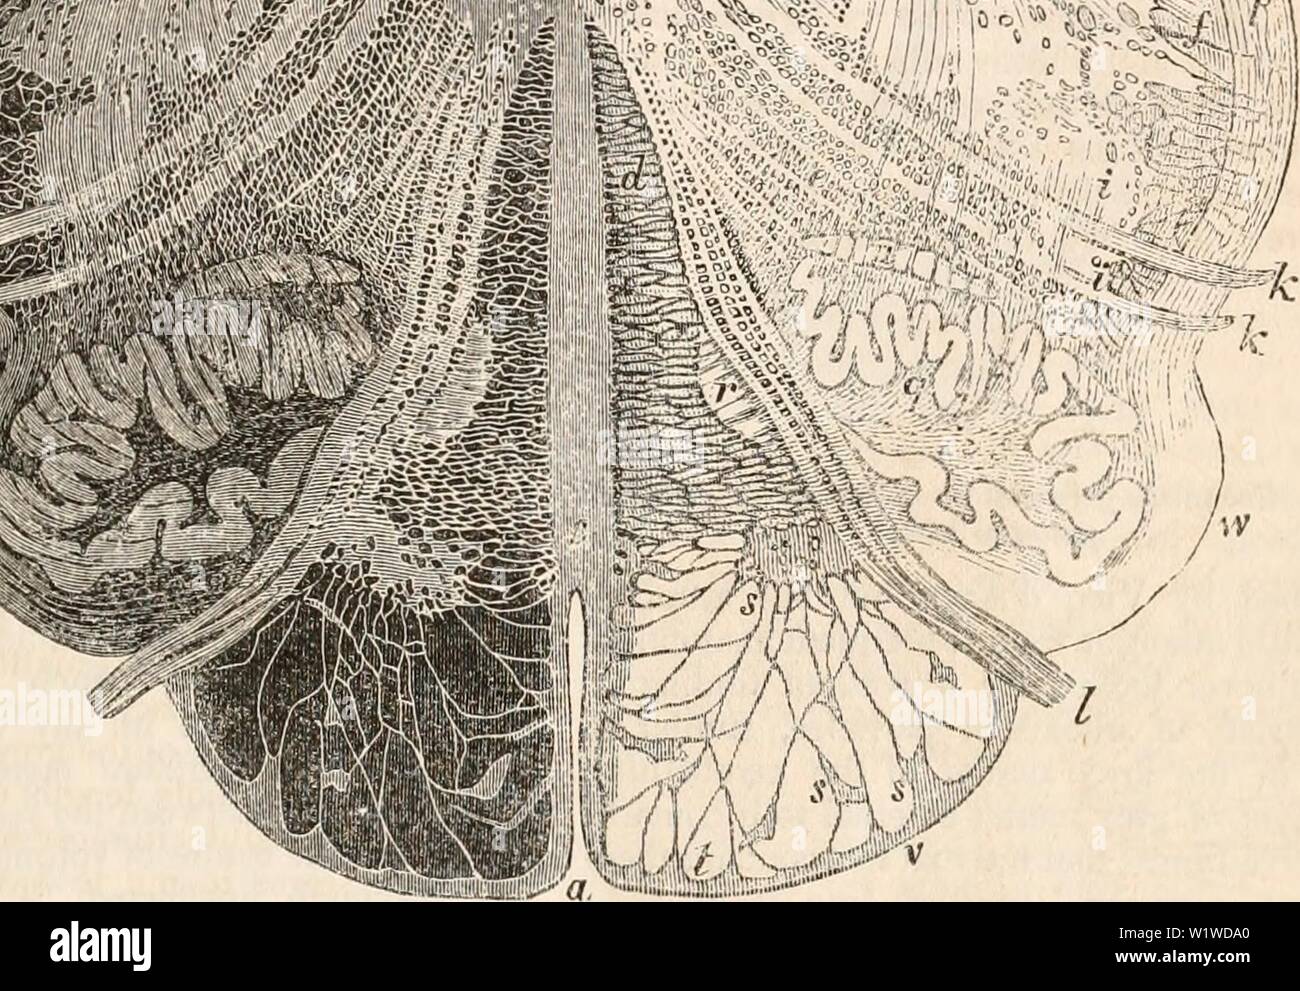 Archive image from page 722 of The cyclopædia of anatomy and. The cyclopædia of anatomy and physiology  cyclopdiaofana03todd Year: 1847 'ii 555=3 .'.: • , ' T / •    Transverse section of the medulla oblongata through the lower third of the olivary bodies. (From Stilling.) Magnified ten diameters. a, anterior fissure ; 6, fissure of the calamus scriptorius; c, raphe; d, anterior columns; e, lateral columns ; f, posterior columns ; g, nucleus of the hypoglossal nerve, containing large vesicles ; h, nucleus of the vagus nerve ; i, i, gelatinous substance ; k, h, roots of the vagus nerve ; I, roo Stock Photo